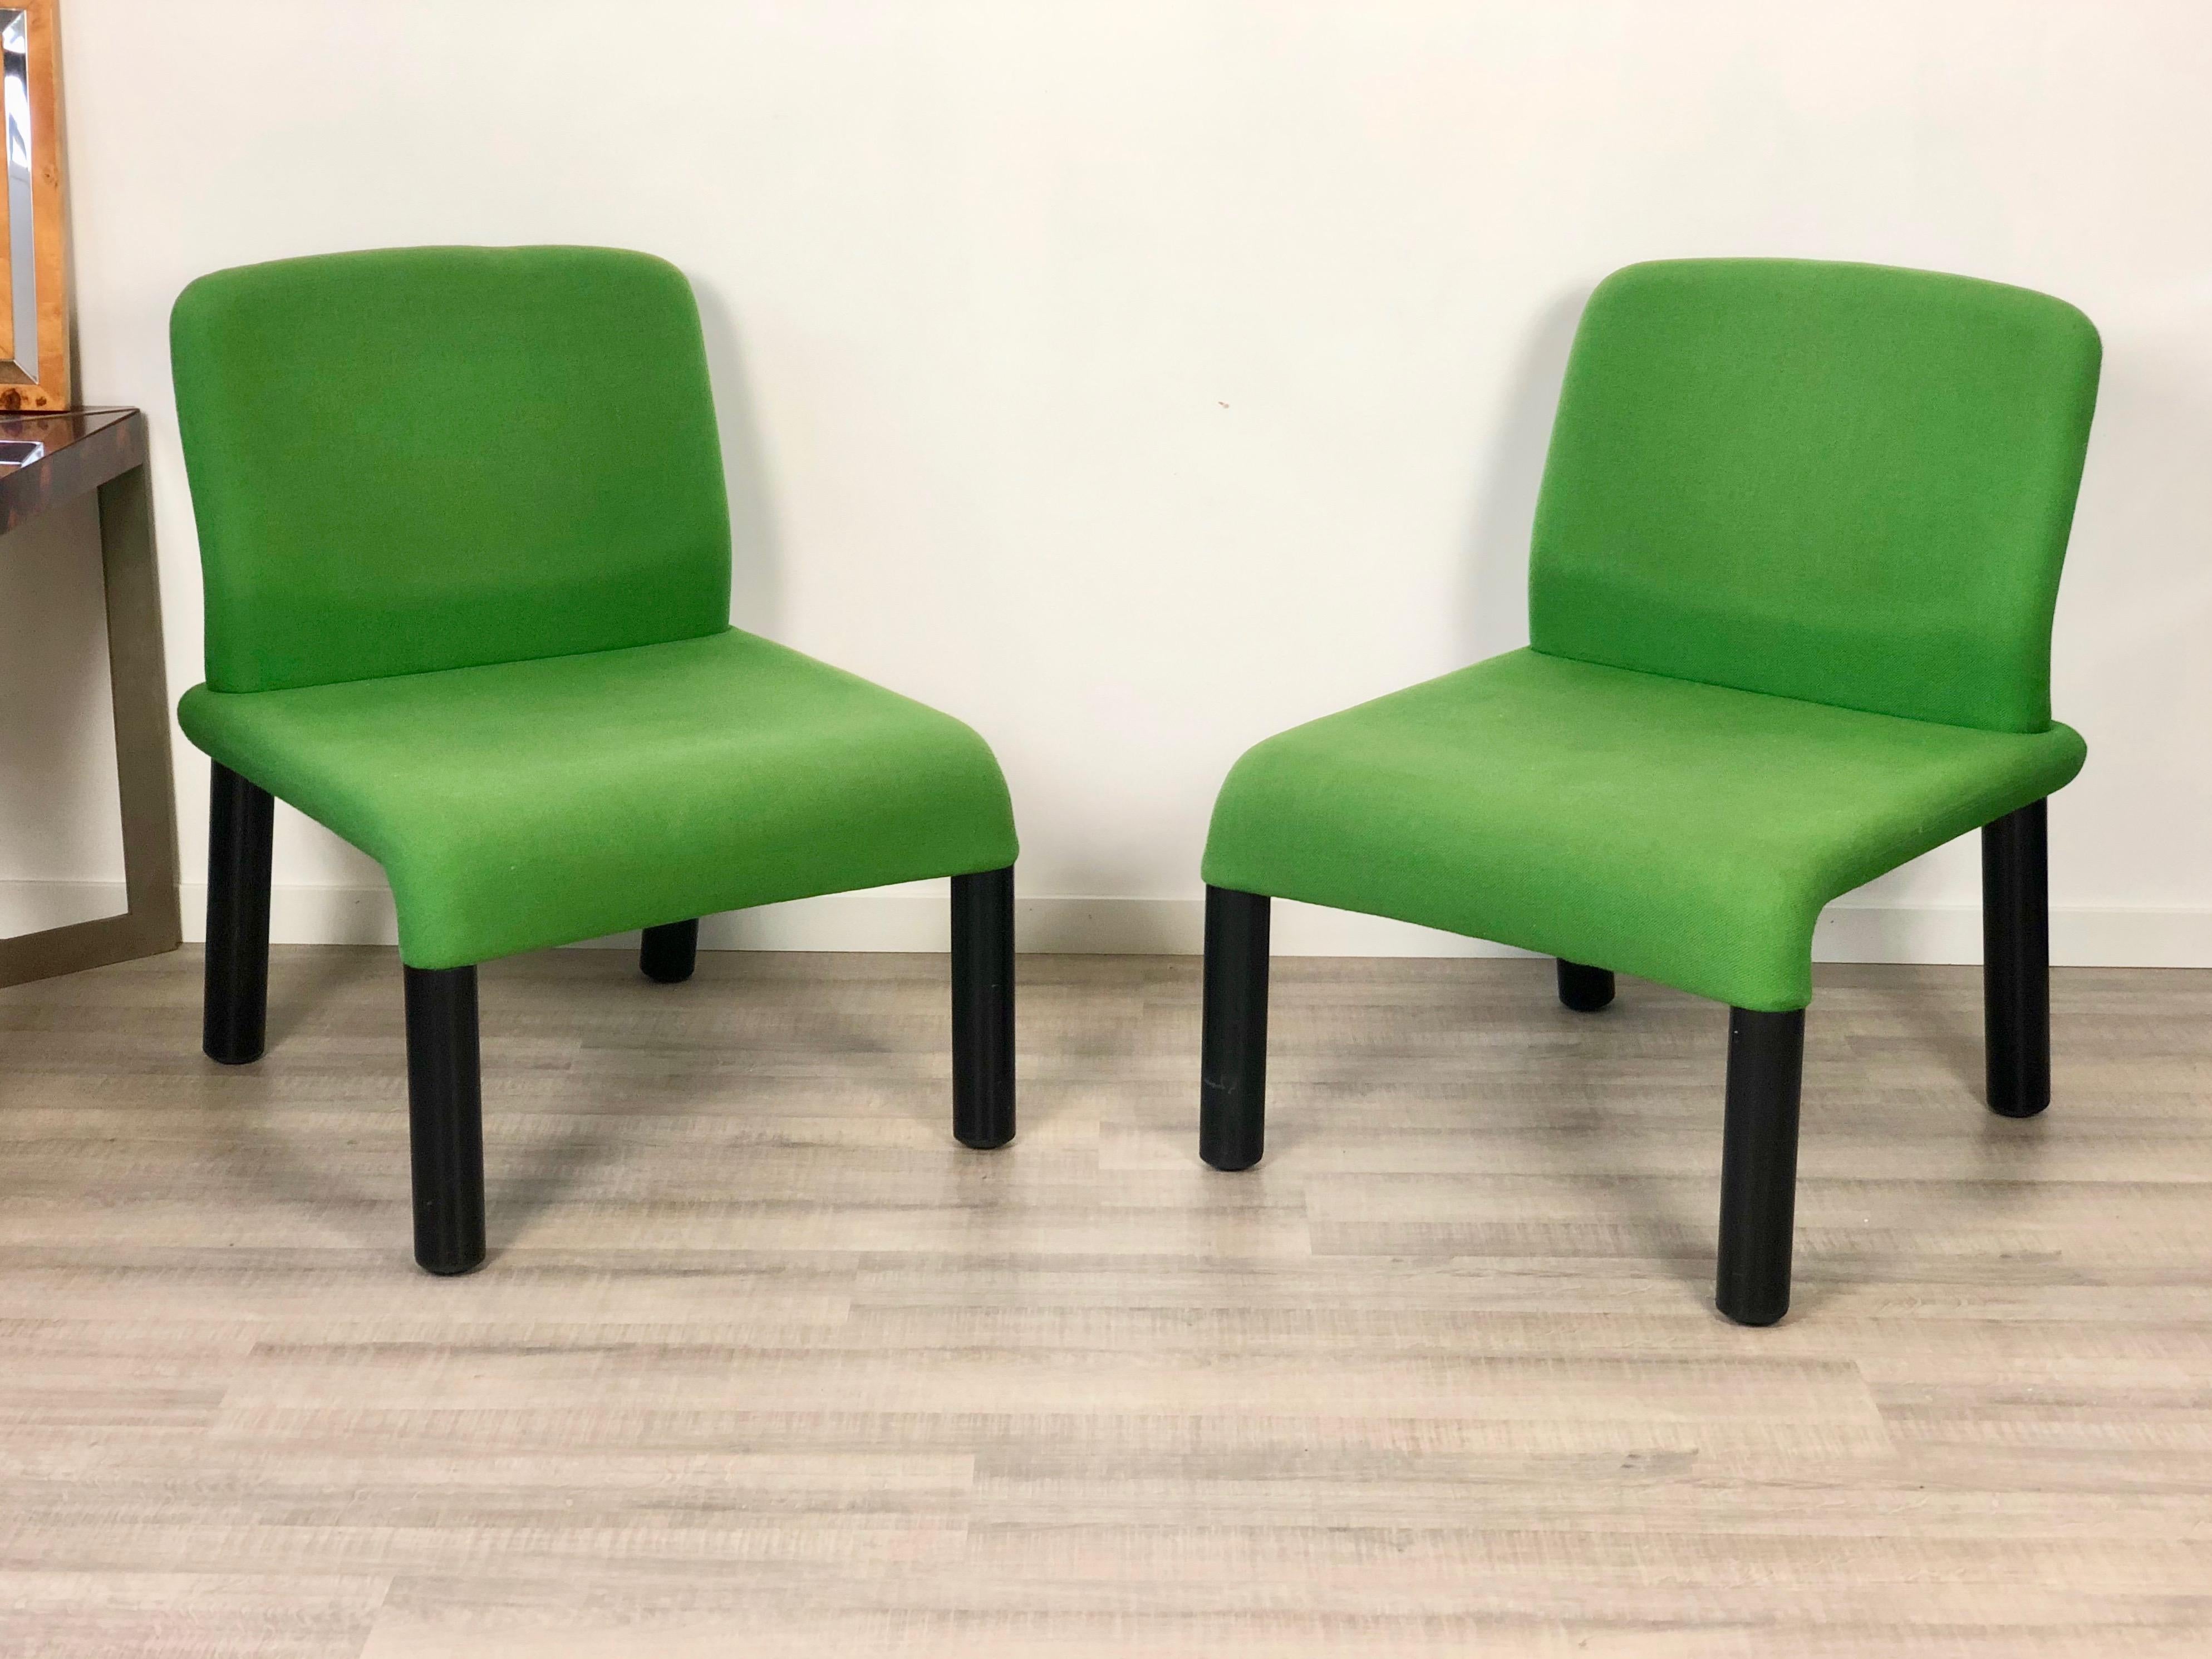 Pair of green armchair in plastic fabric made in Italy, circa 1970.
Measures: 40 cm / 15.75 inches seat height.